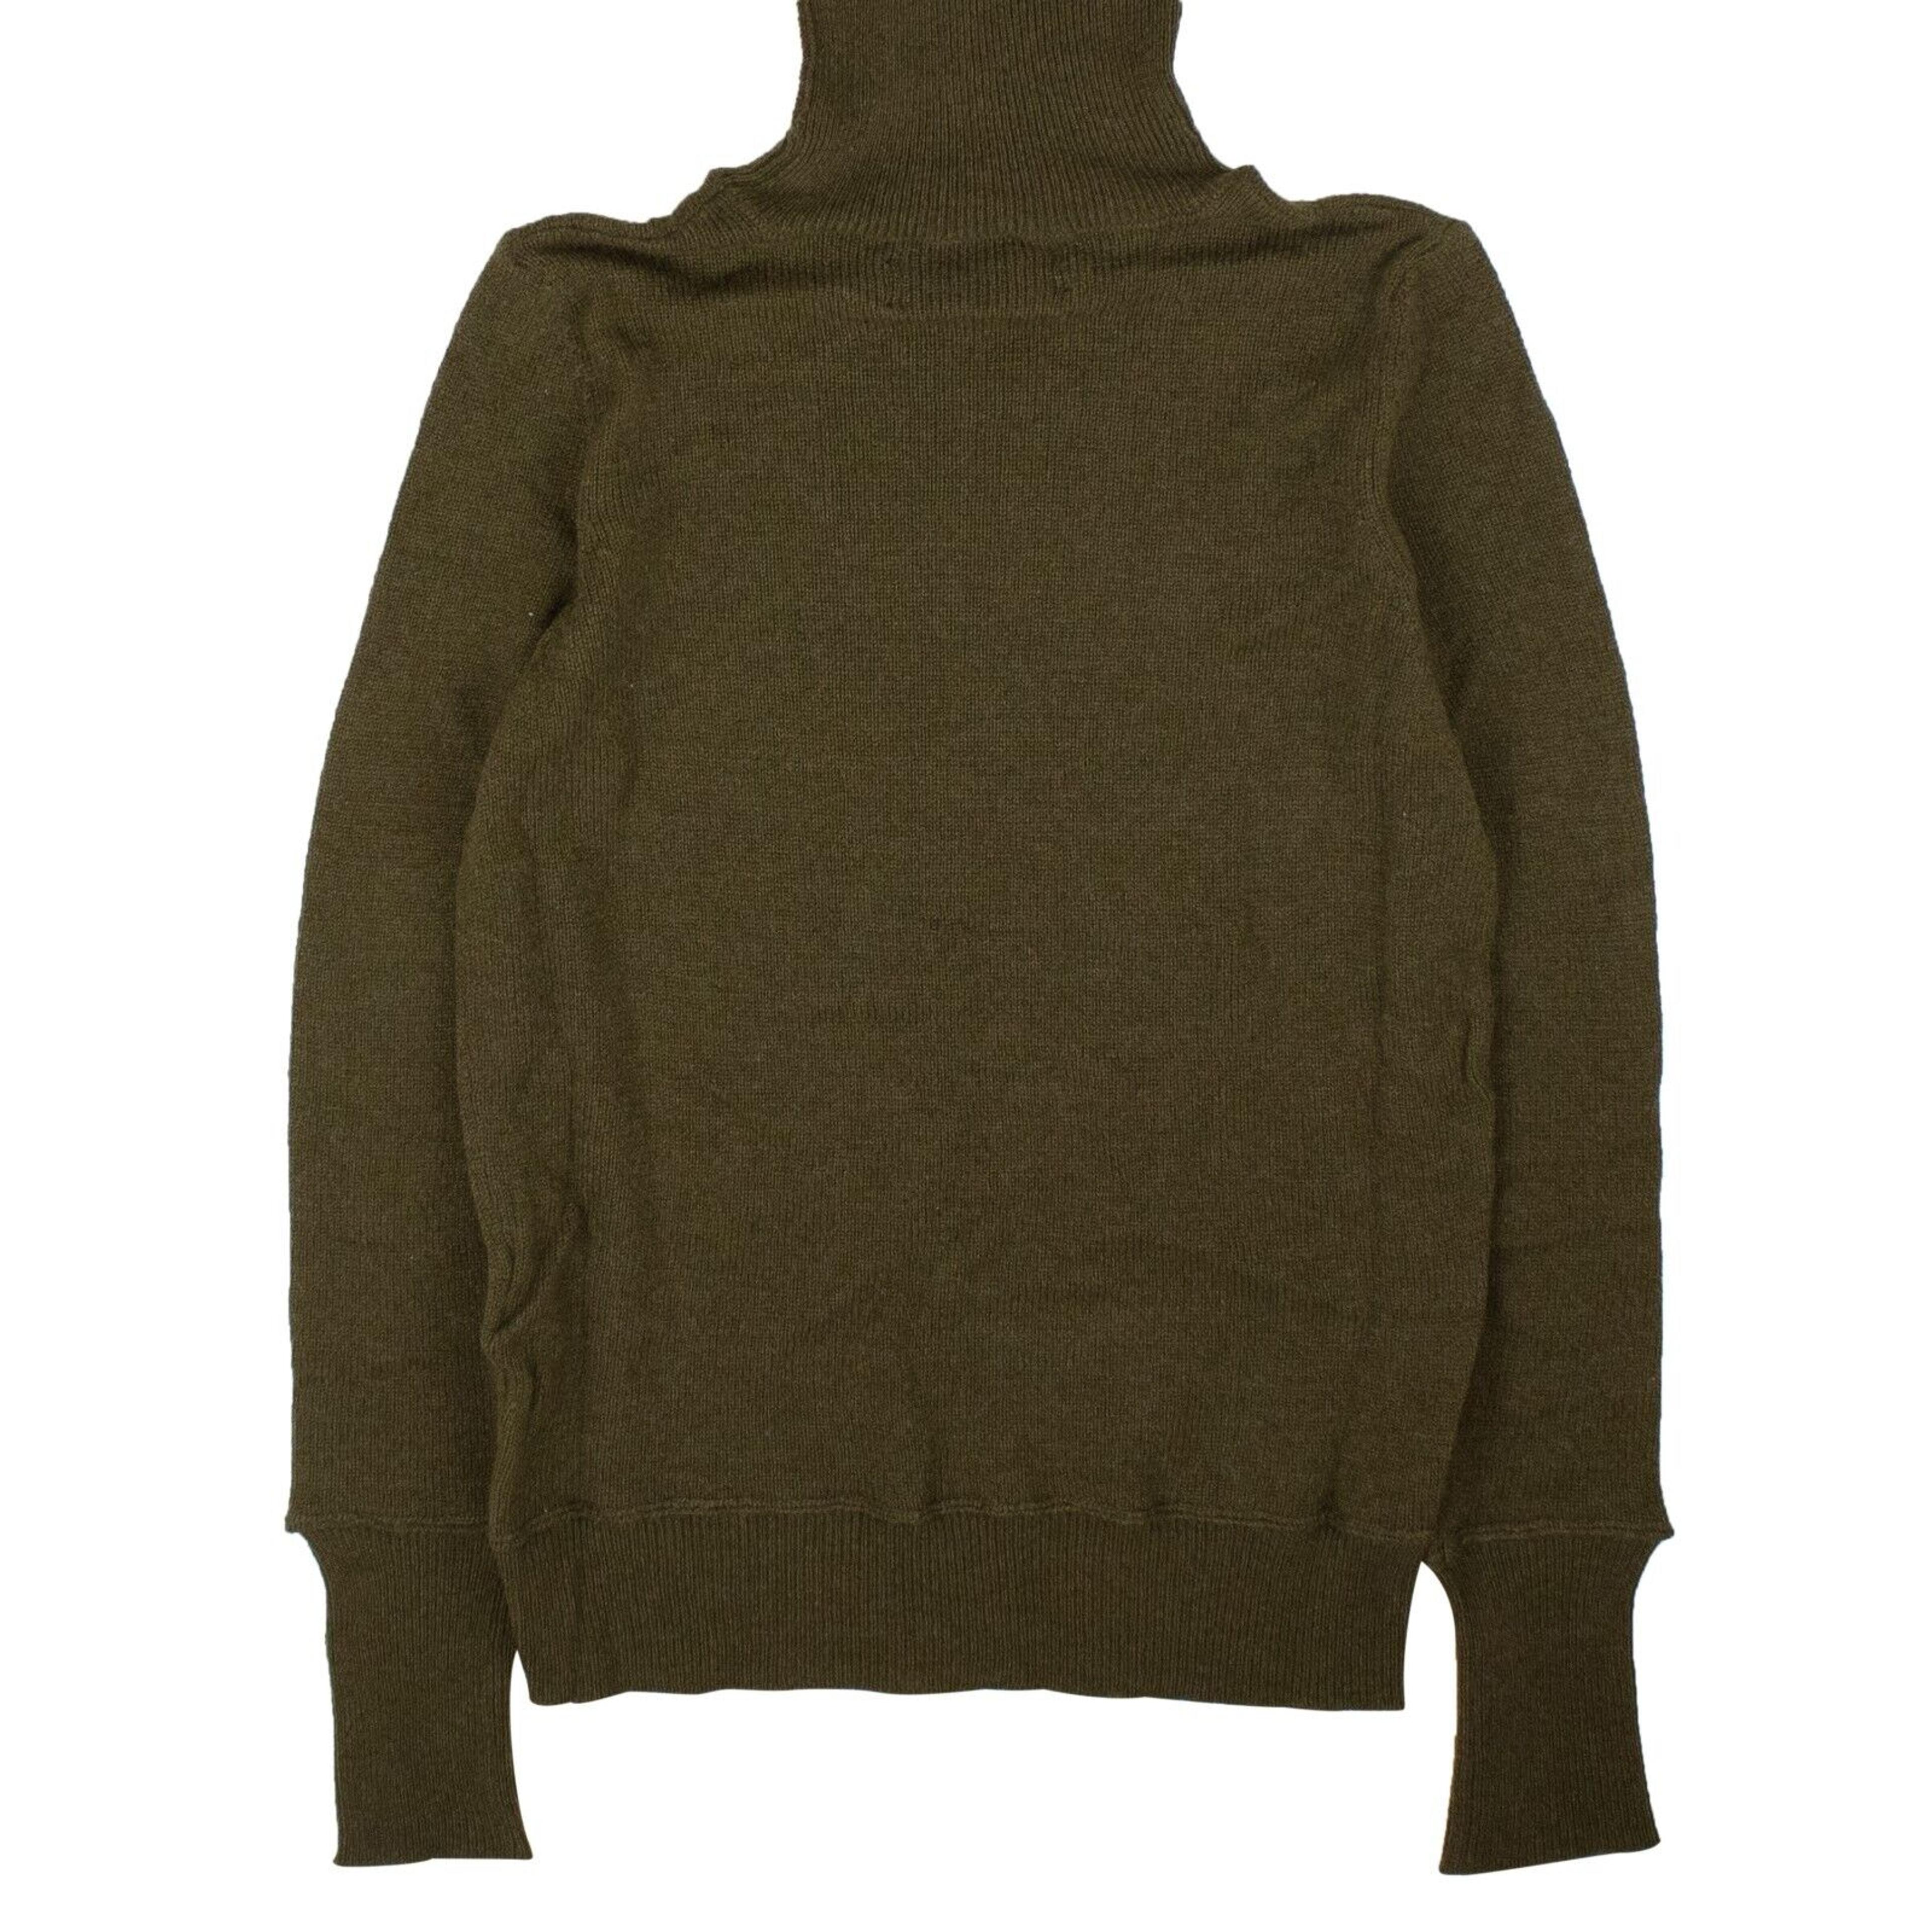 Alternate View 3 of Olive Green Distressed Cashmere Crewneck